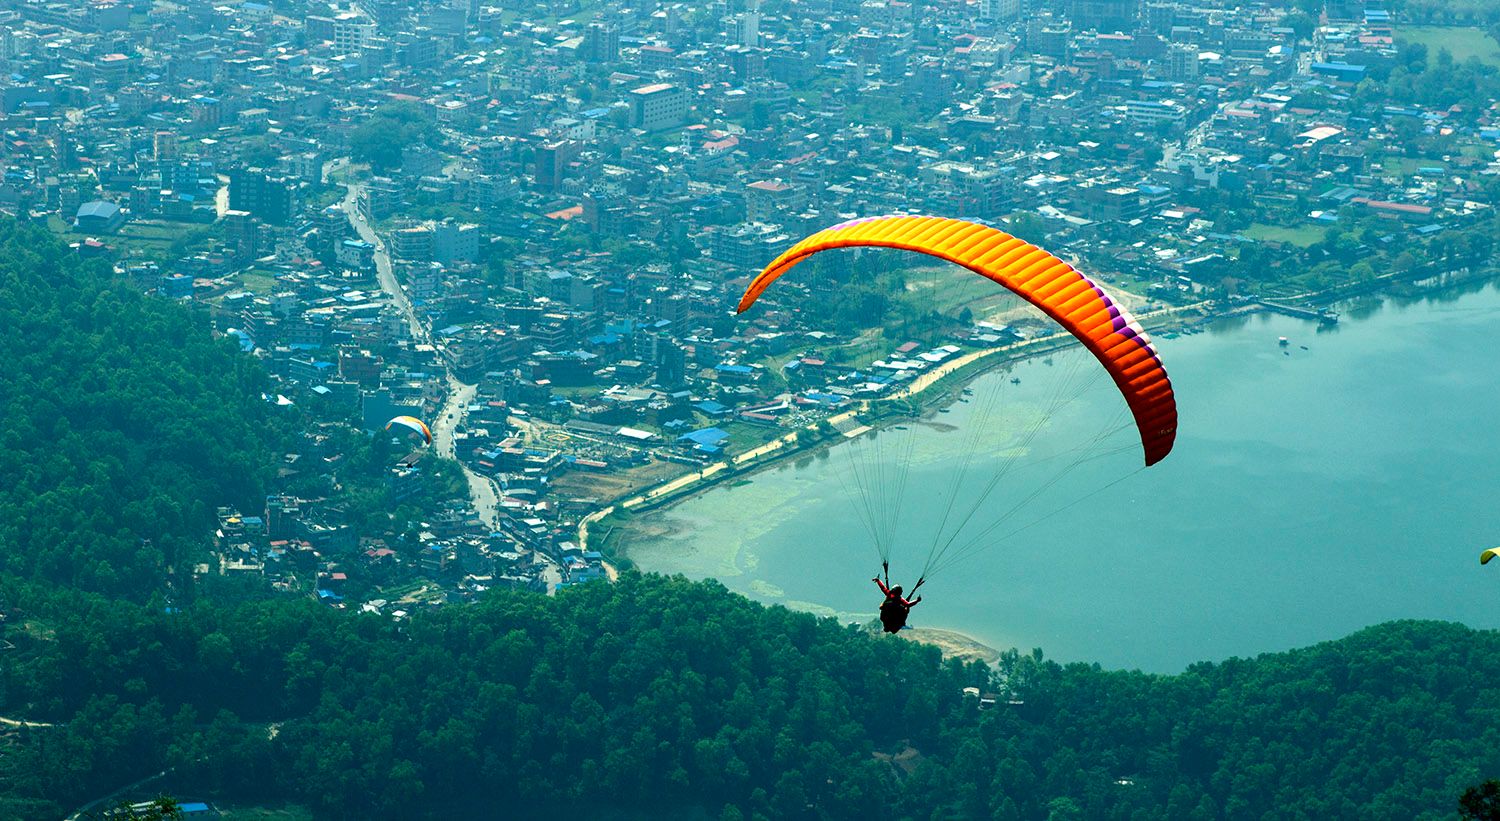 How safe is Paragliding?